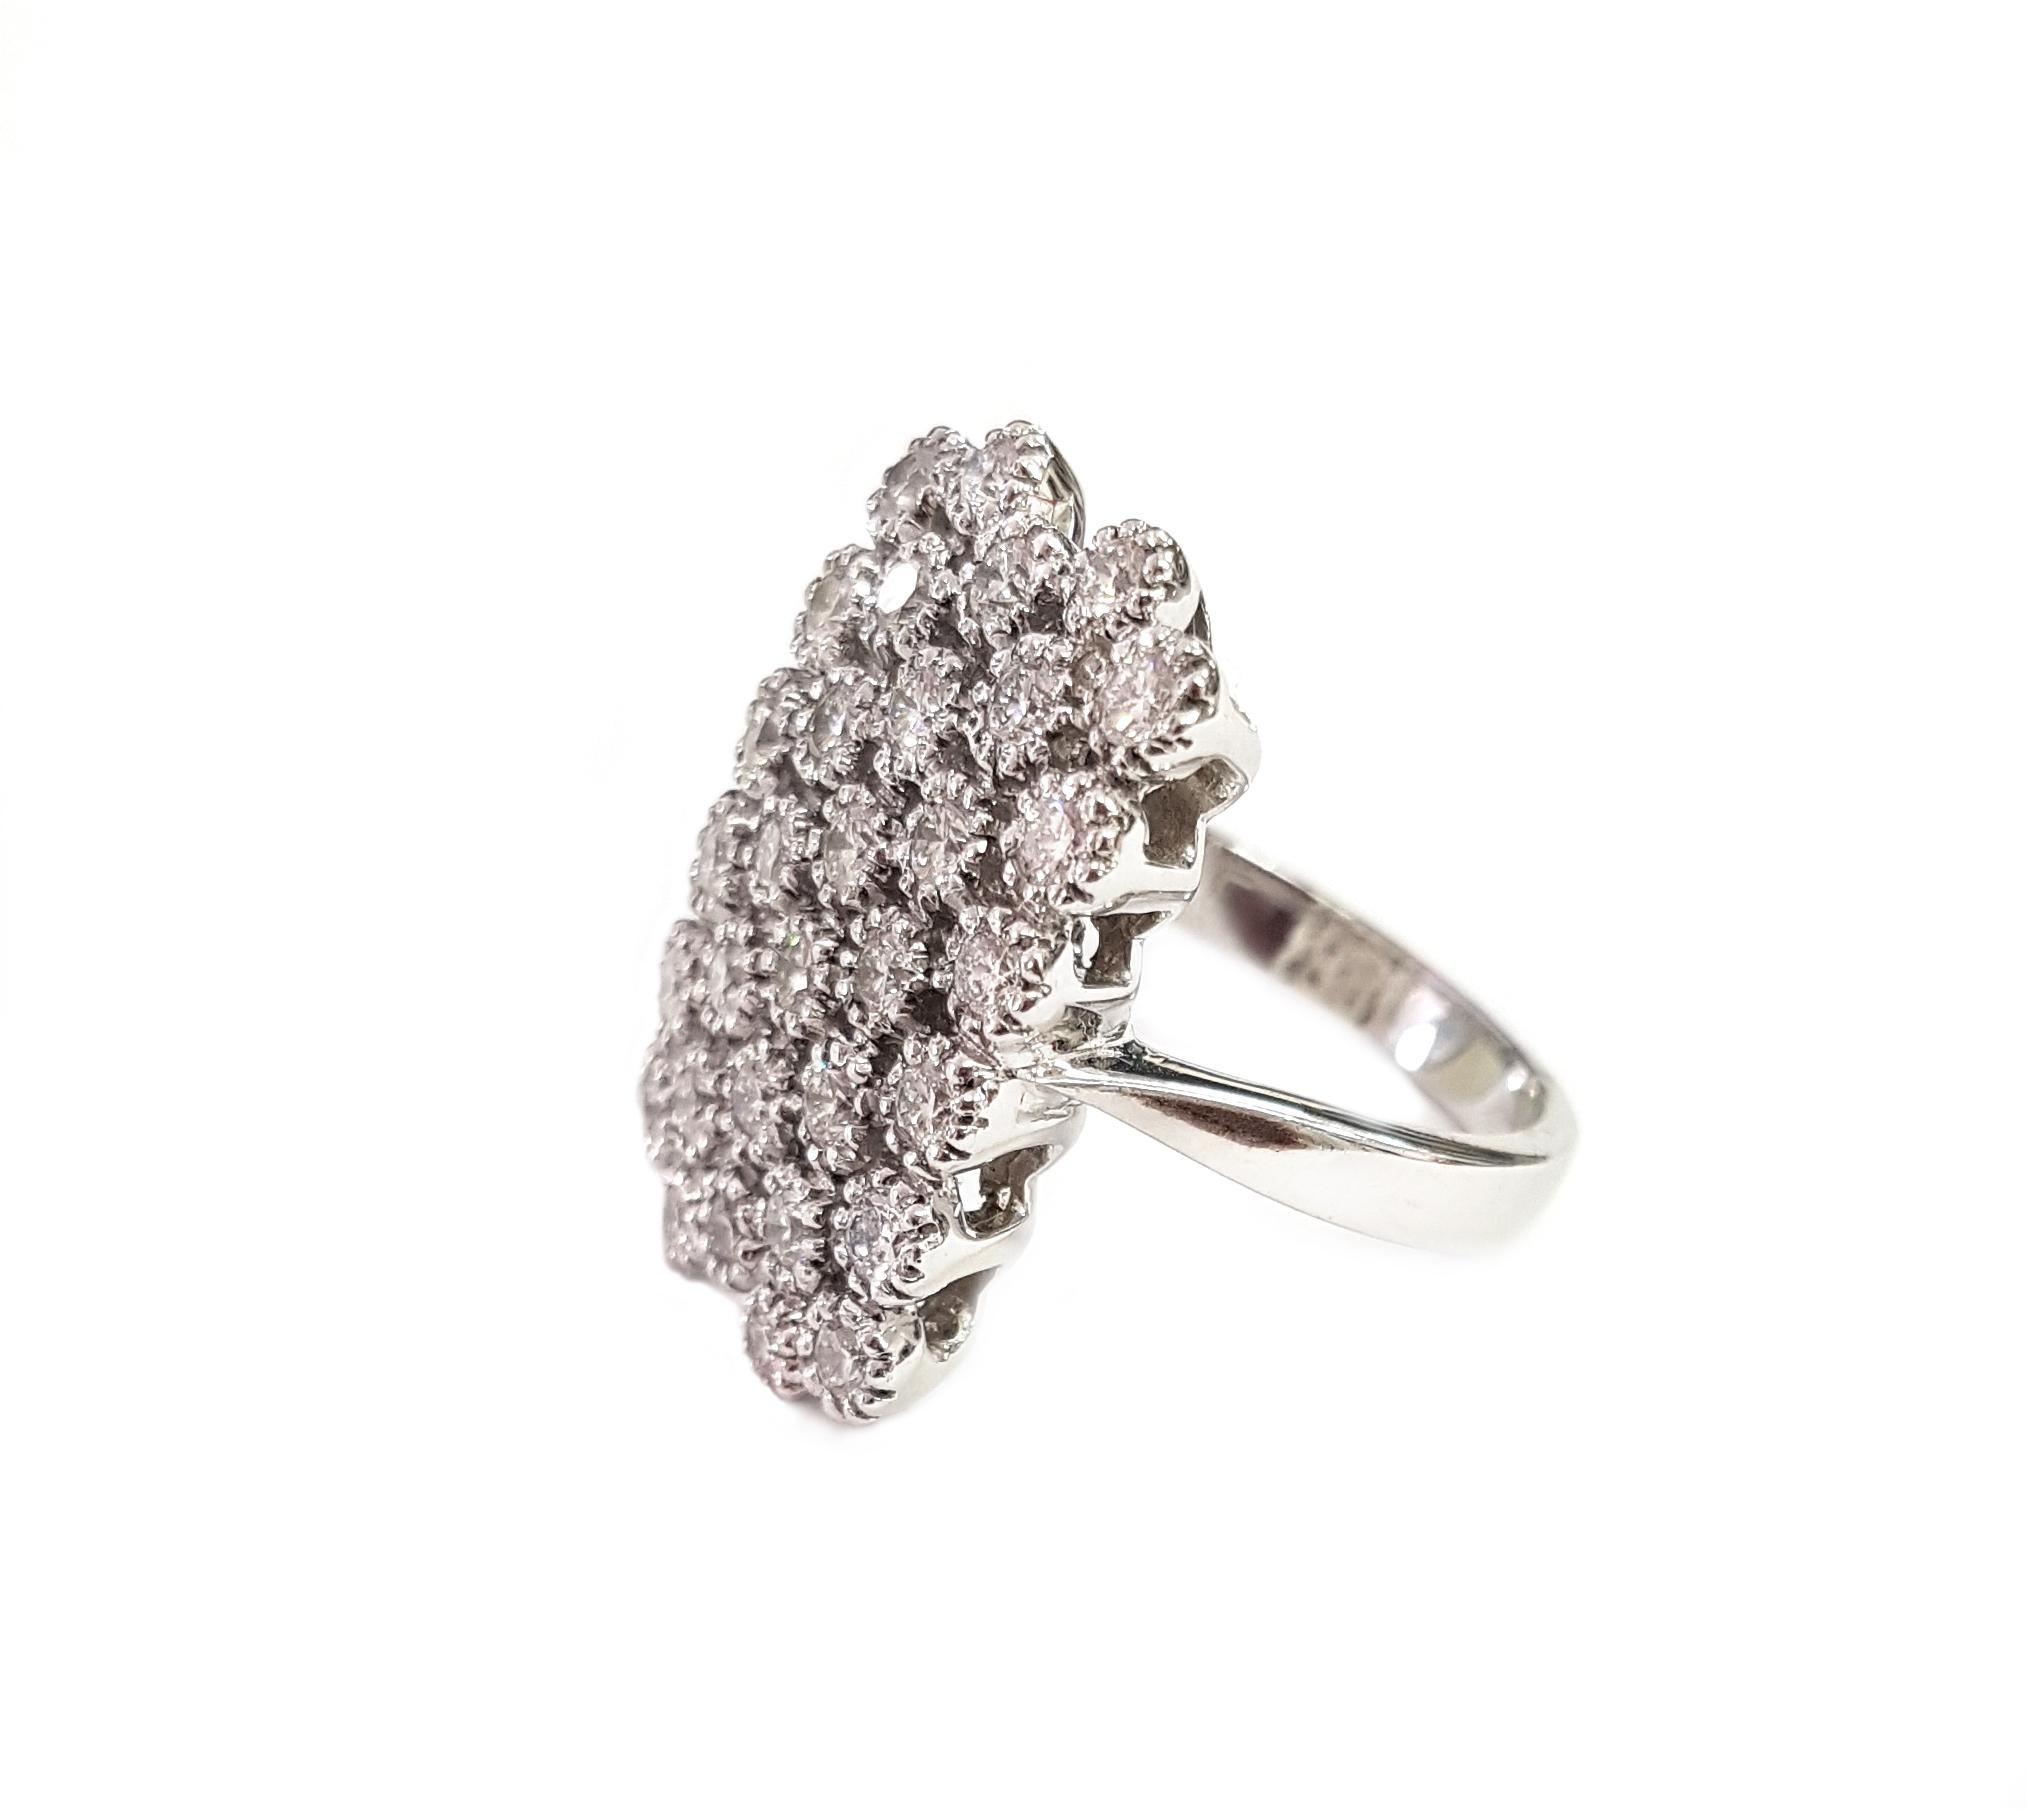 This 18-karat white gold and diamond cocktail ring extends beautifully down the finger.  

Thirty-two (32) round-cut diamonds totalling 1.38 carats are set in staggered rows and sit atop a simple white gold band. The ring is 2 centimetres long.